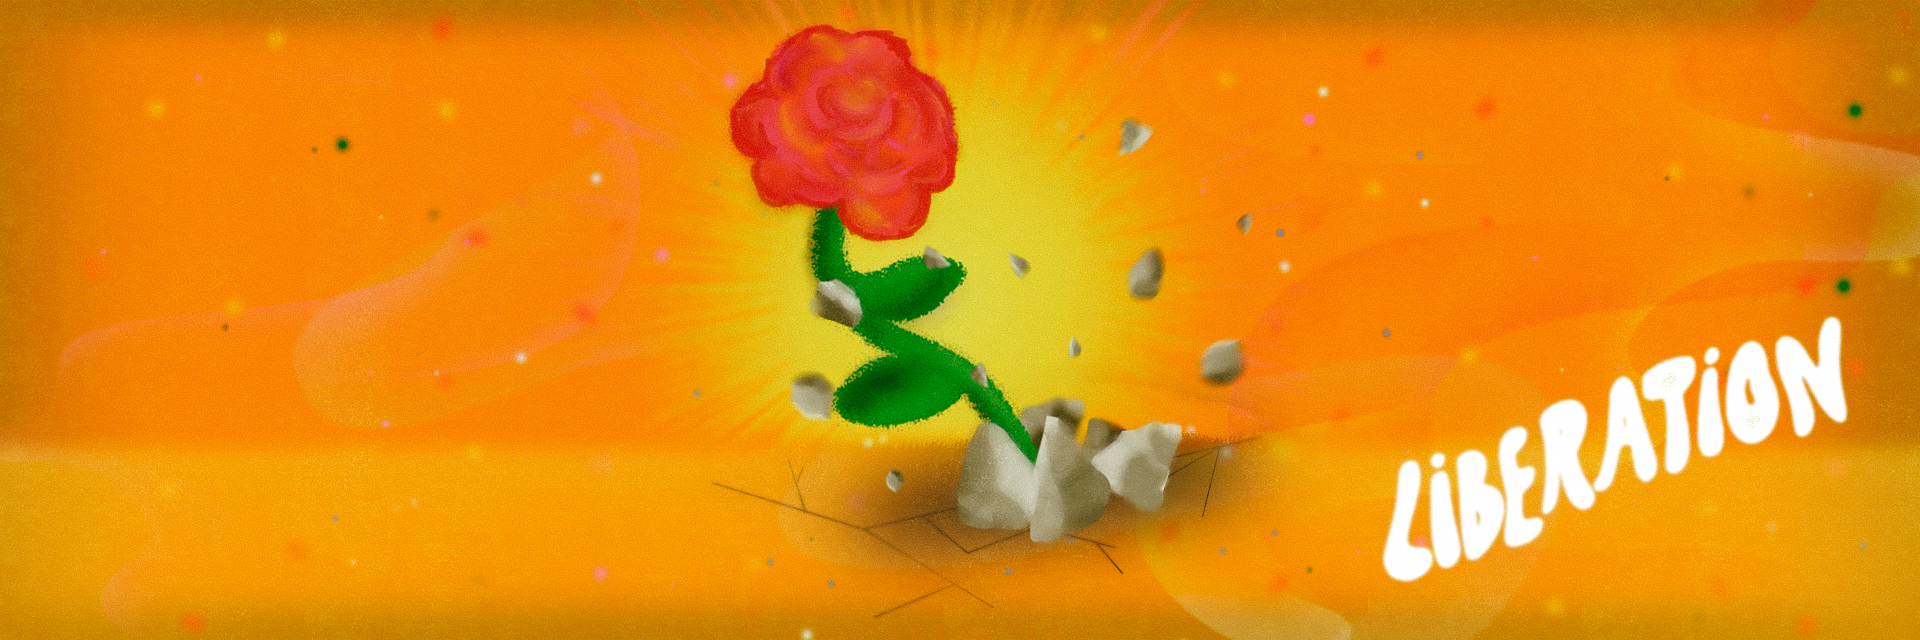 “Liberation” category artwork: A rose emerging from rocks